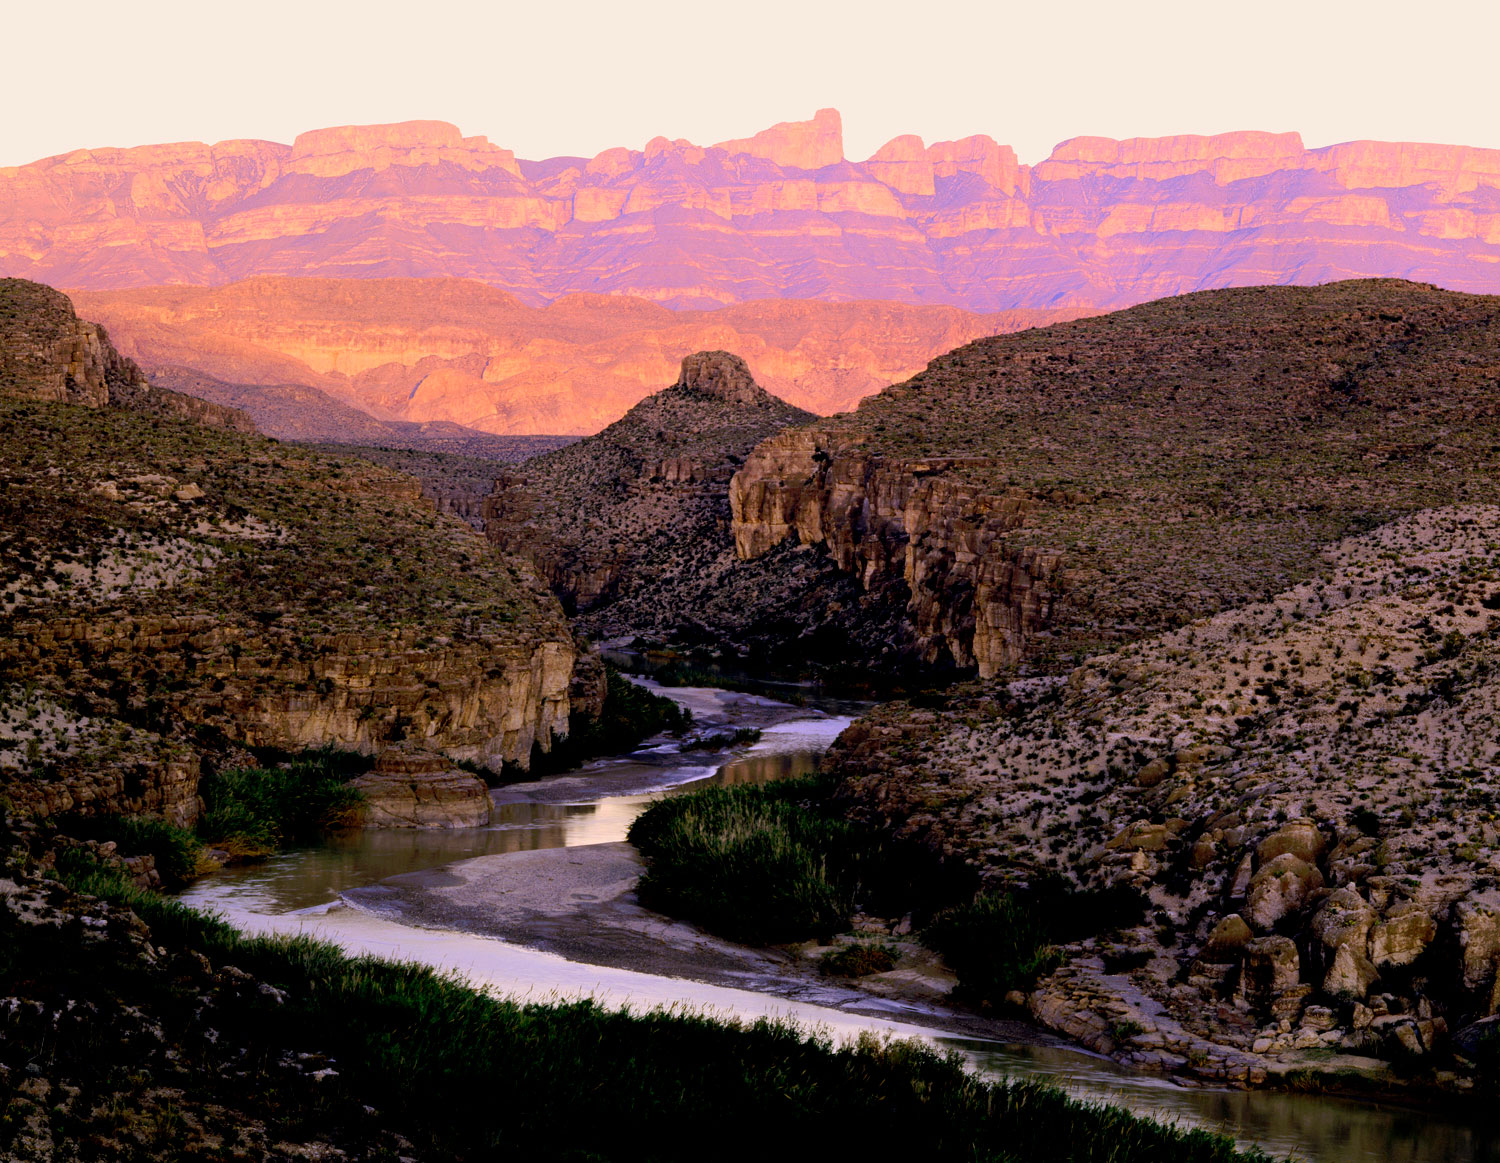 Rio Grande River with Sierra del Carmen mountains in the background at sunset